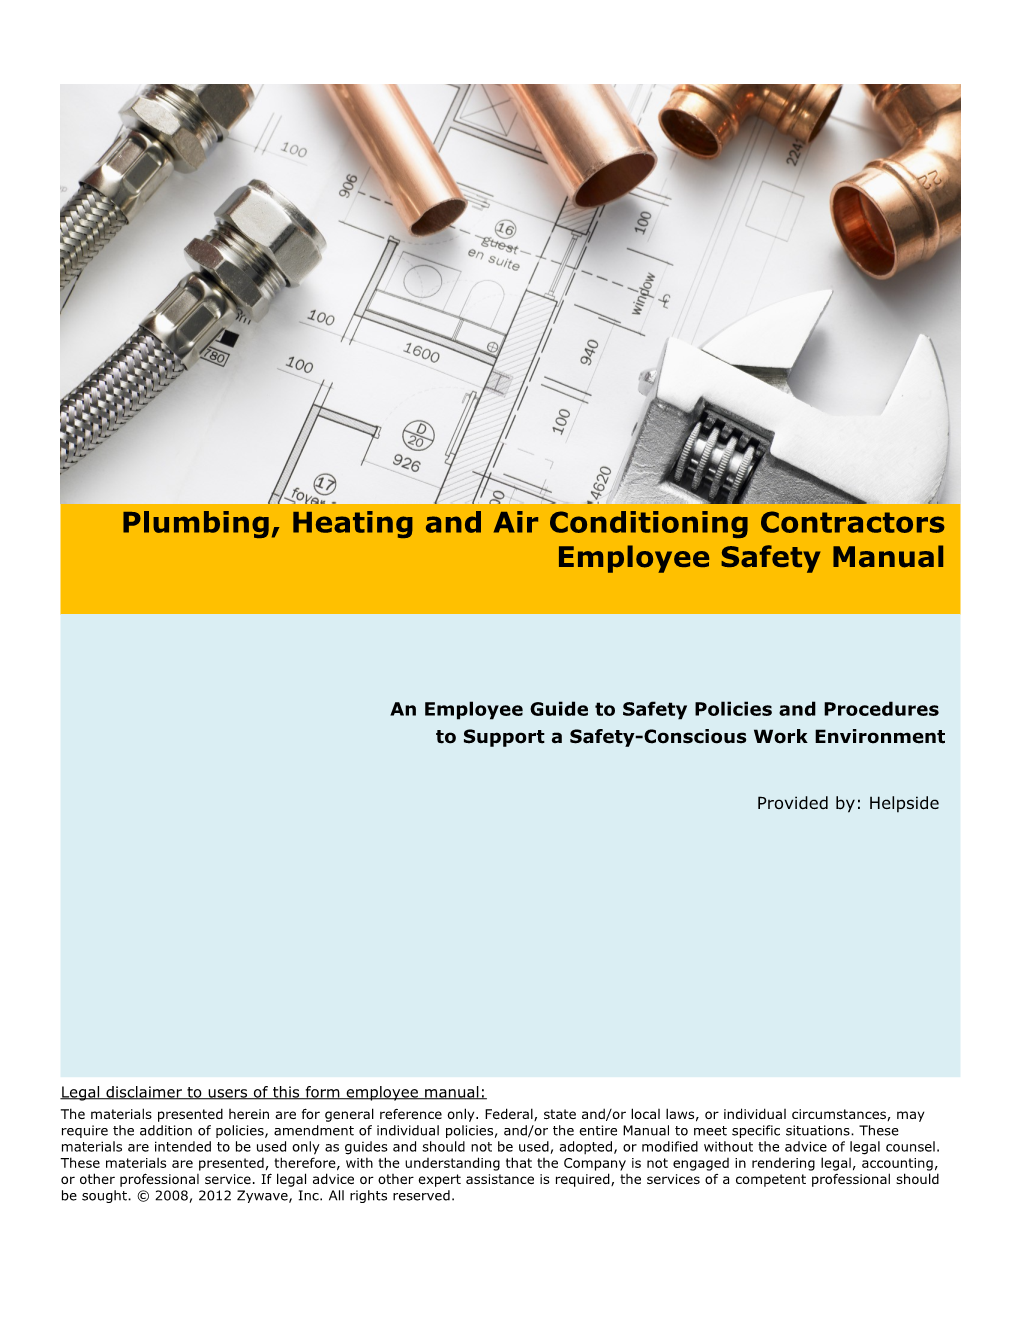 Plumbing, Heating and Air Conditioning Contractors Employee Safety Manual